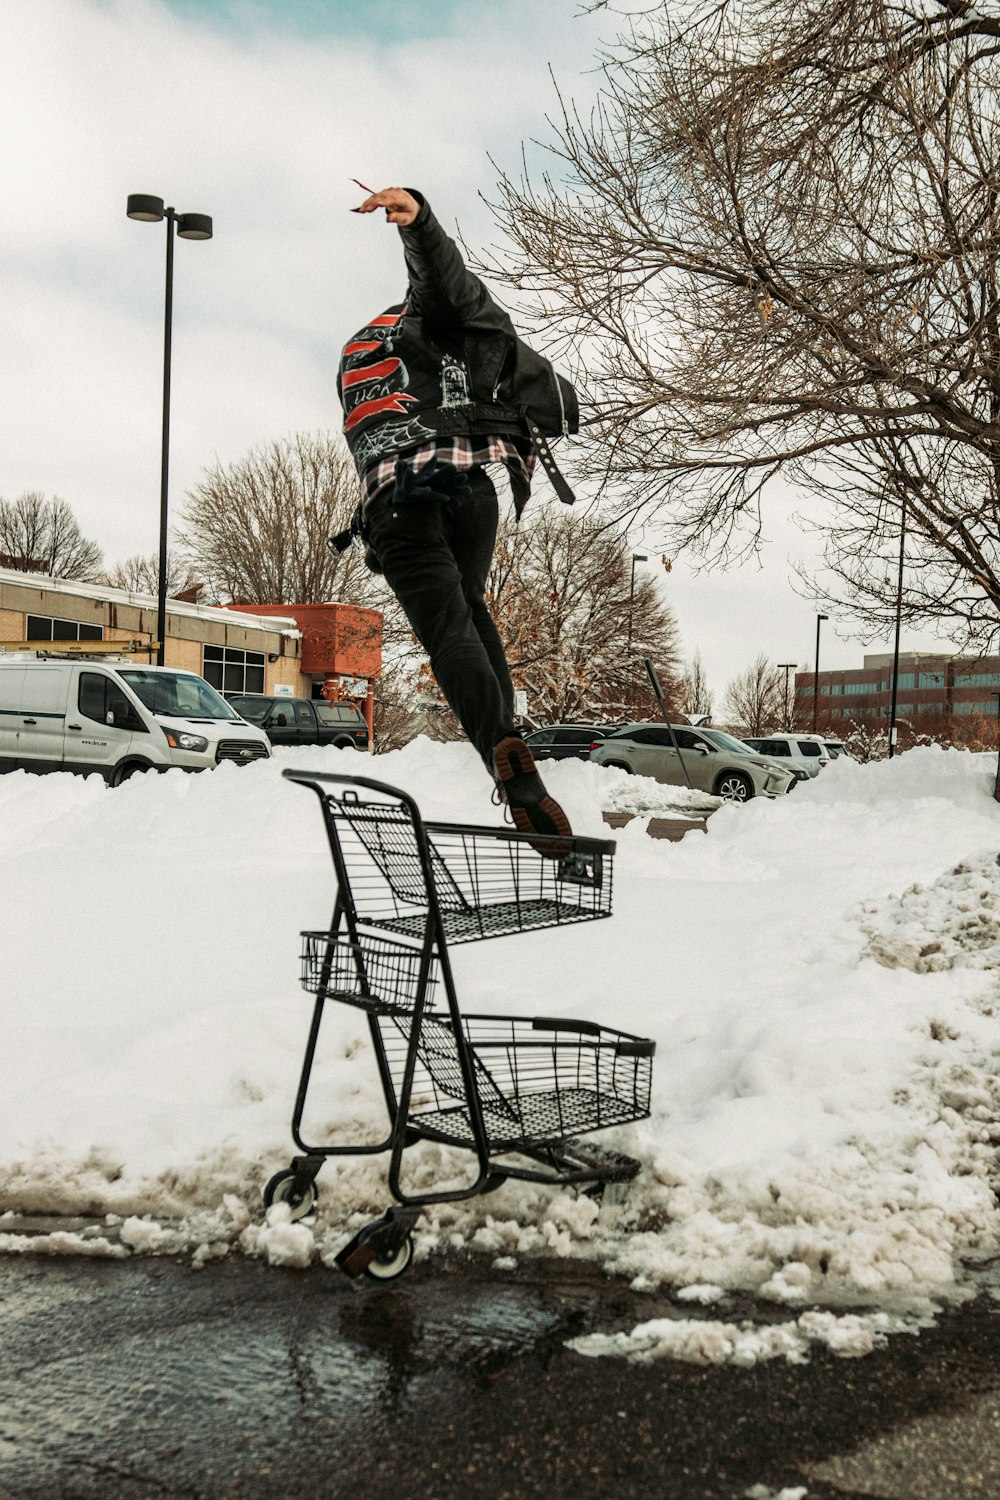 man in black jacket and brown pants riding on black shopping cart on snow covered ground